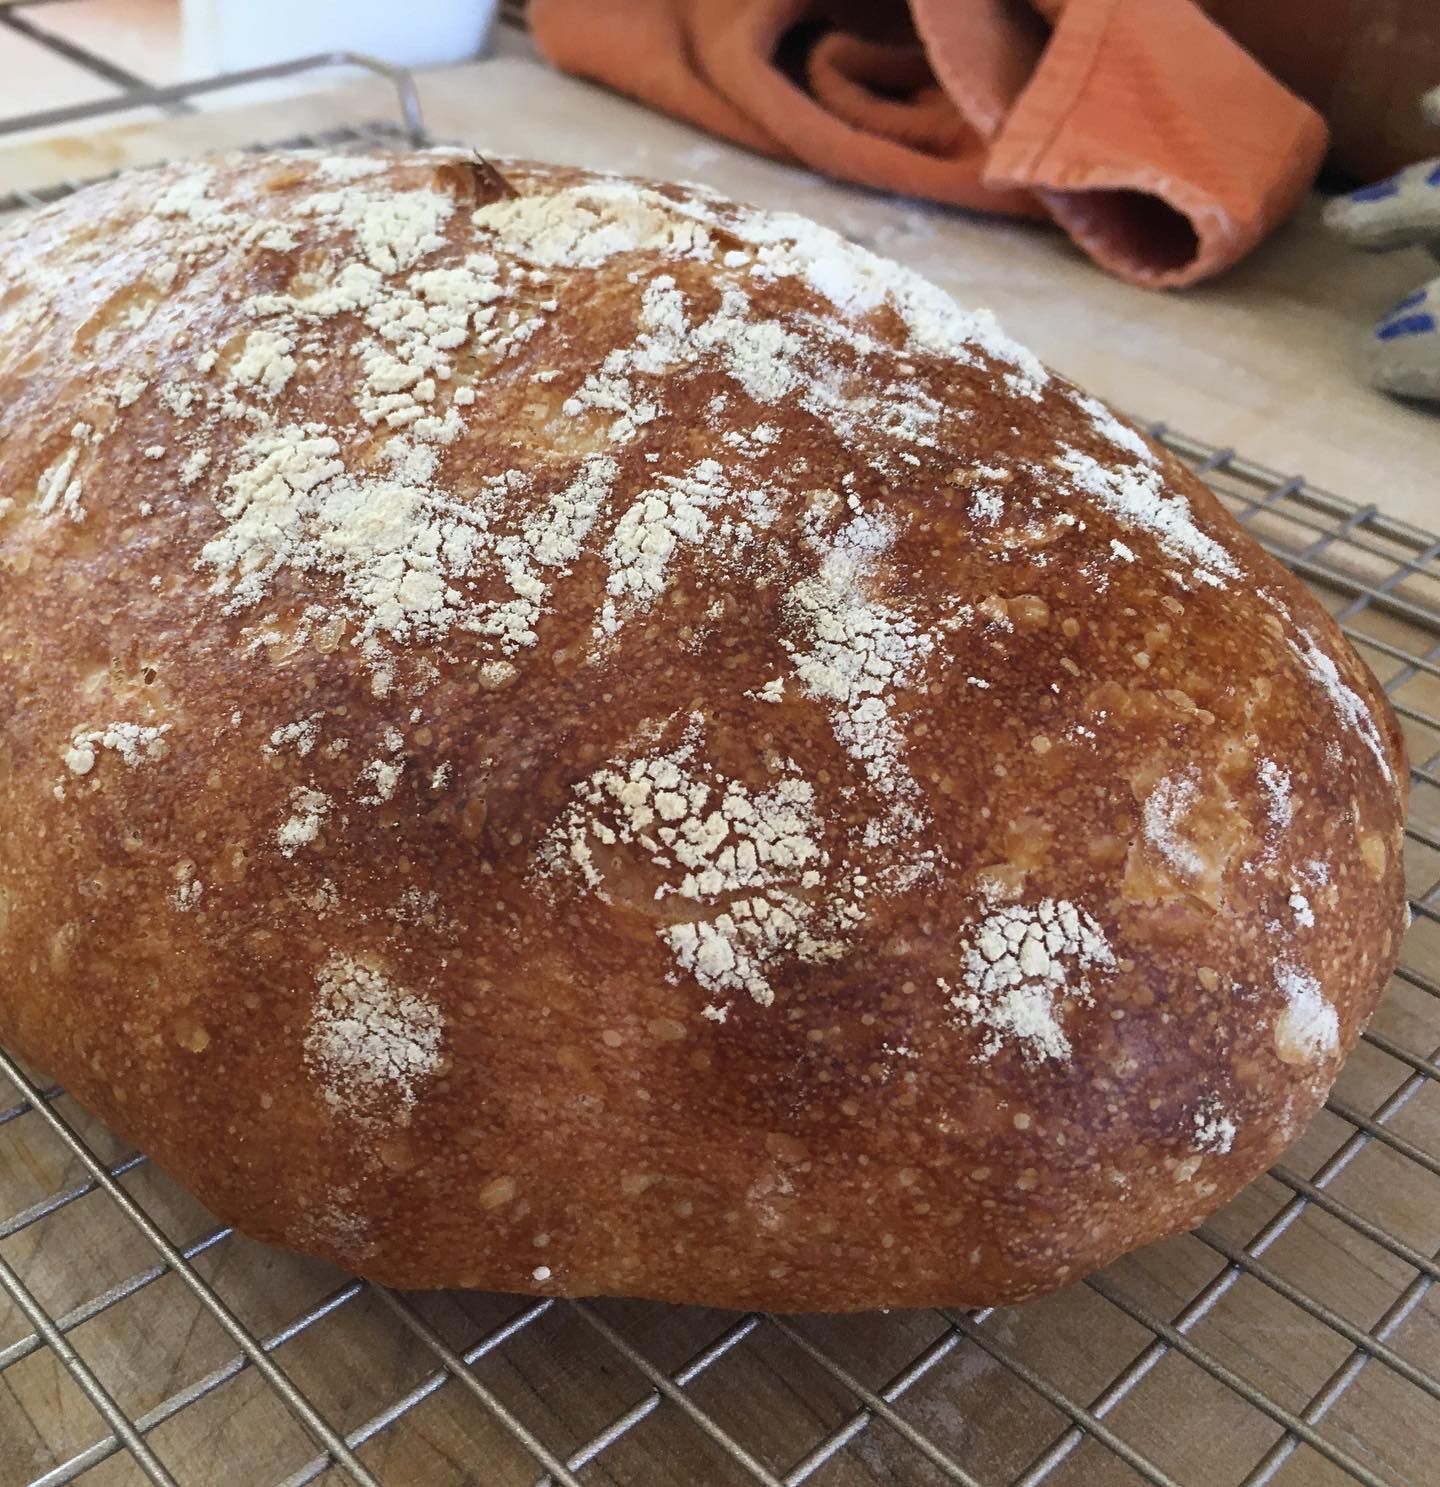 A rich, brown crusted loaf of ciabatta, dusted with flour.